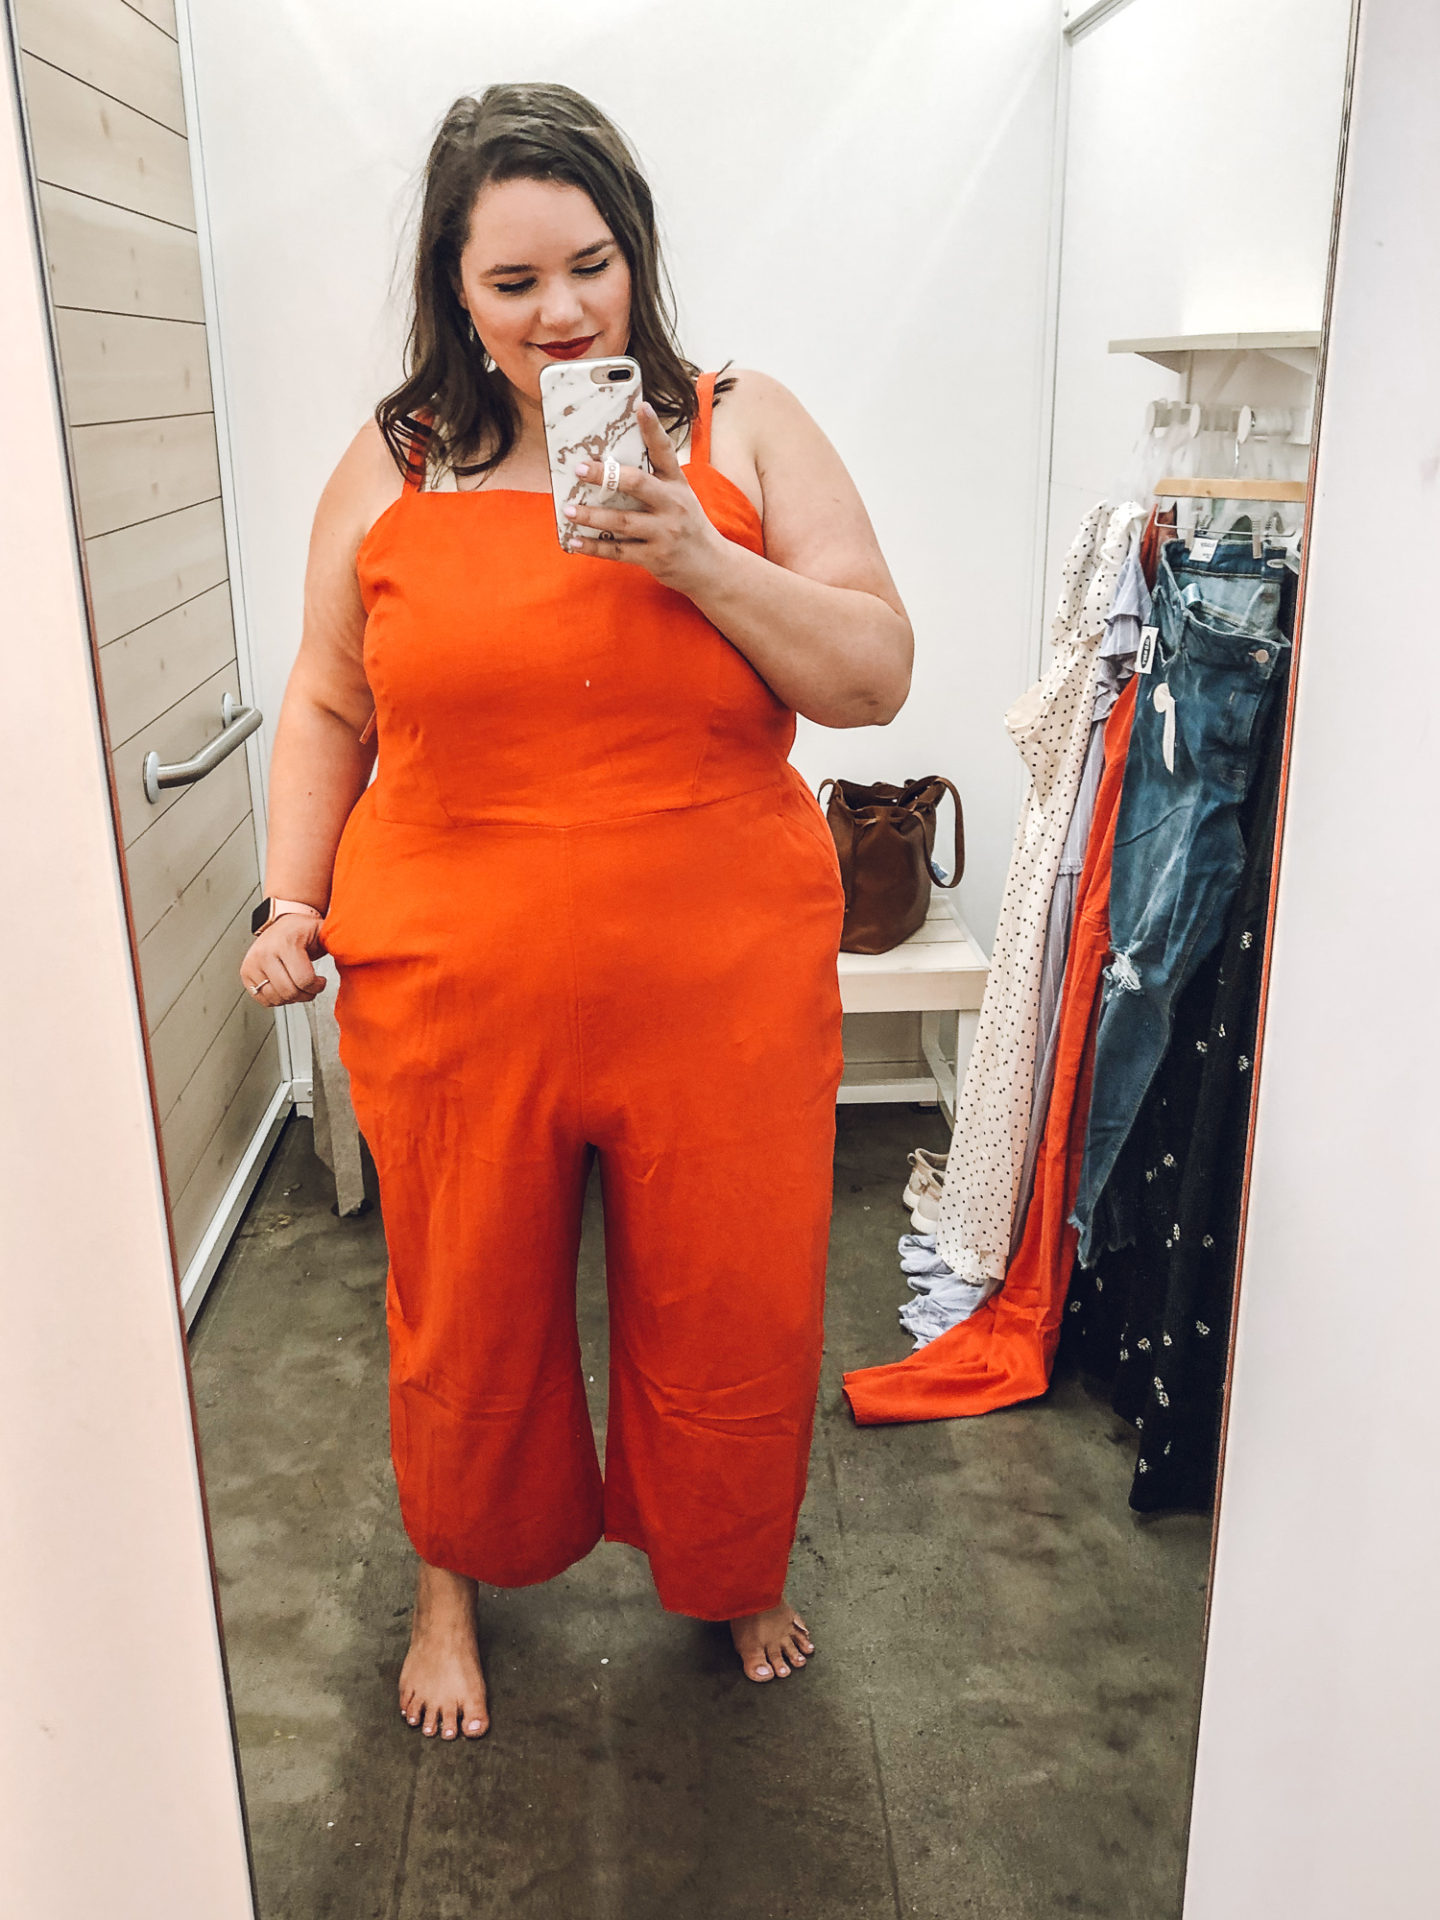 OLD NAVY TRY ON APRIL